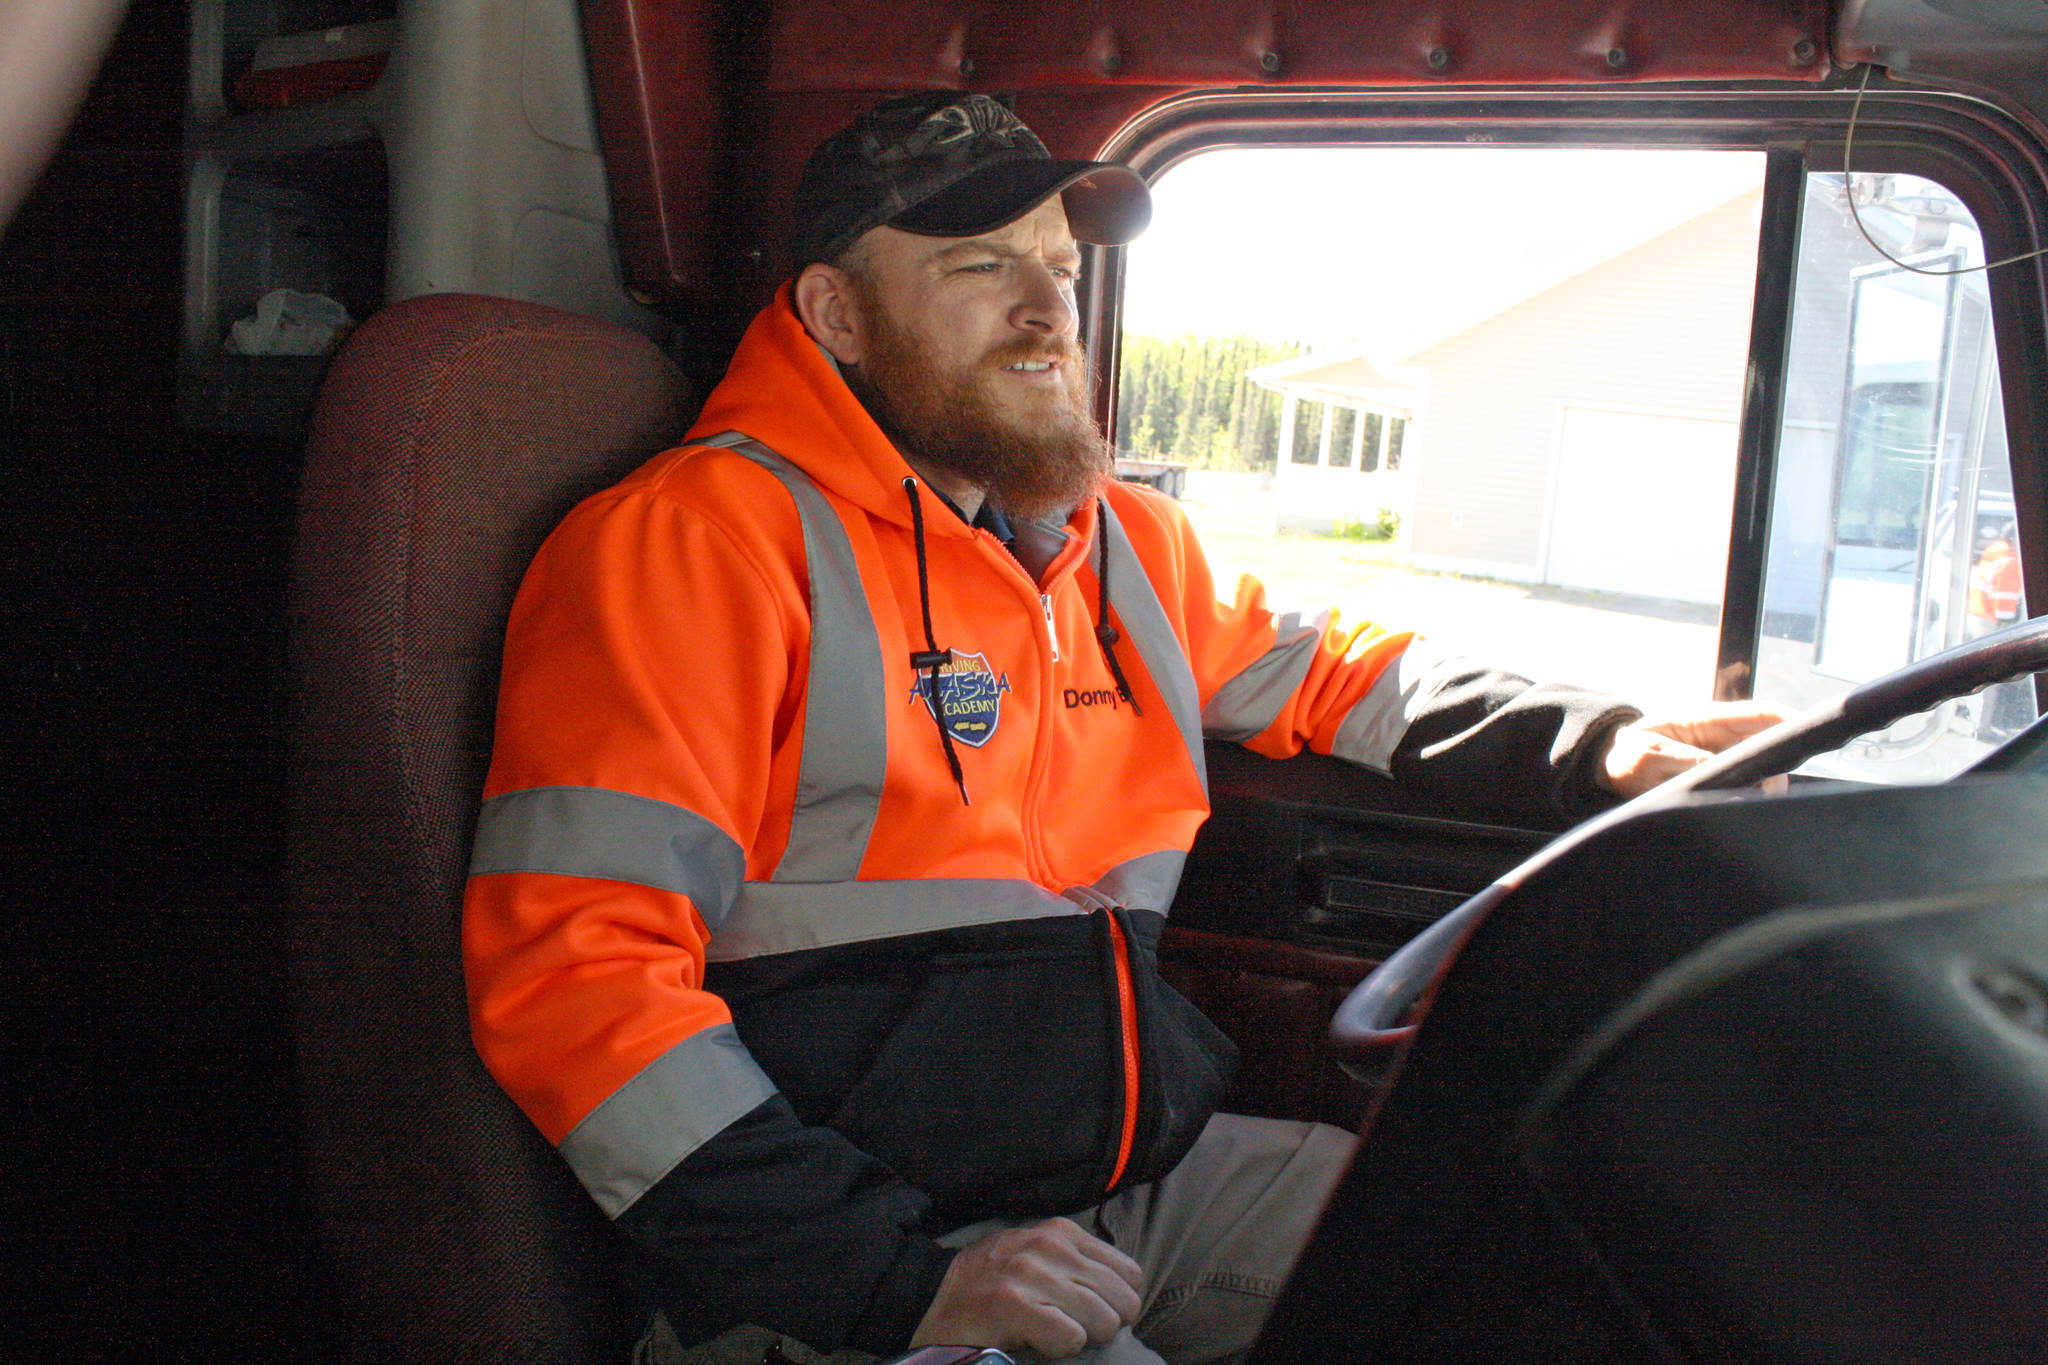 Behind-the-wheel trainer Donny Bergonzini sits in a truck at the Alaska Driving Academy in Sterling on Thursday. Bergonzini, who has 19 years experience in the oil industry, provides commercial driver’s license training at the recently opened academy. (Photo by Erin Thompson/Peninsula Clarion)